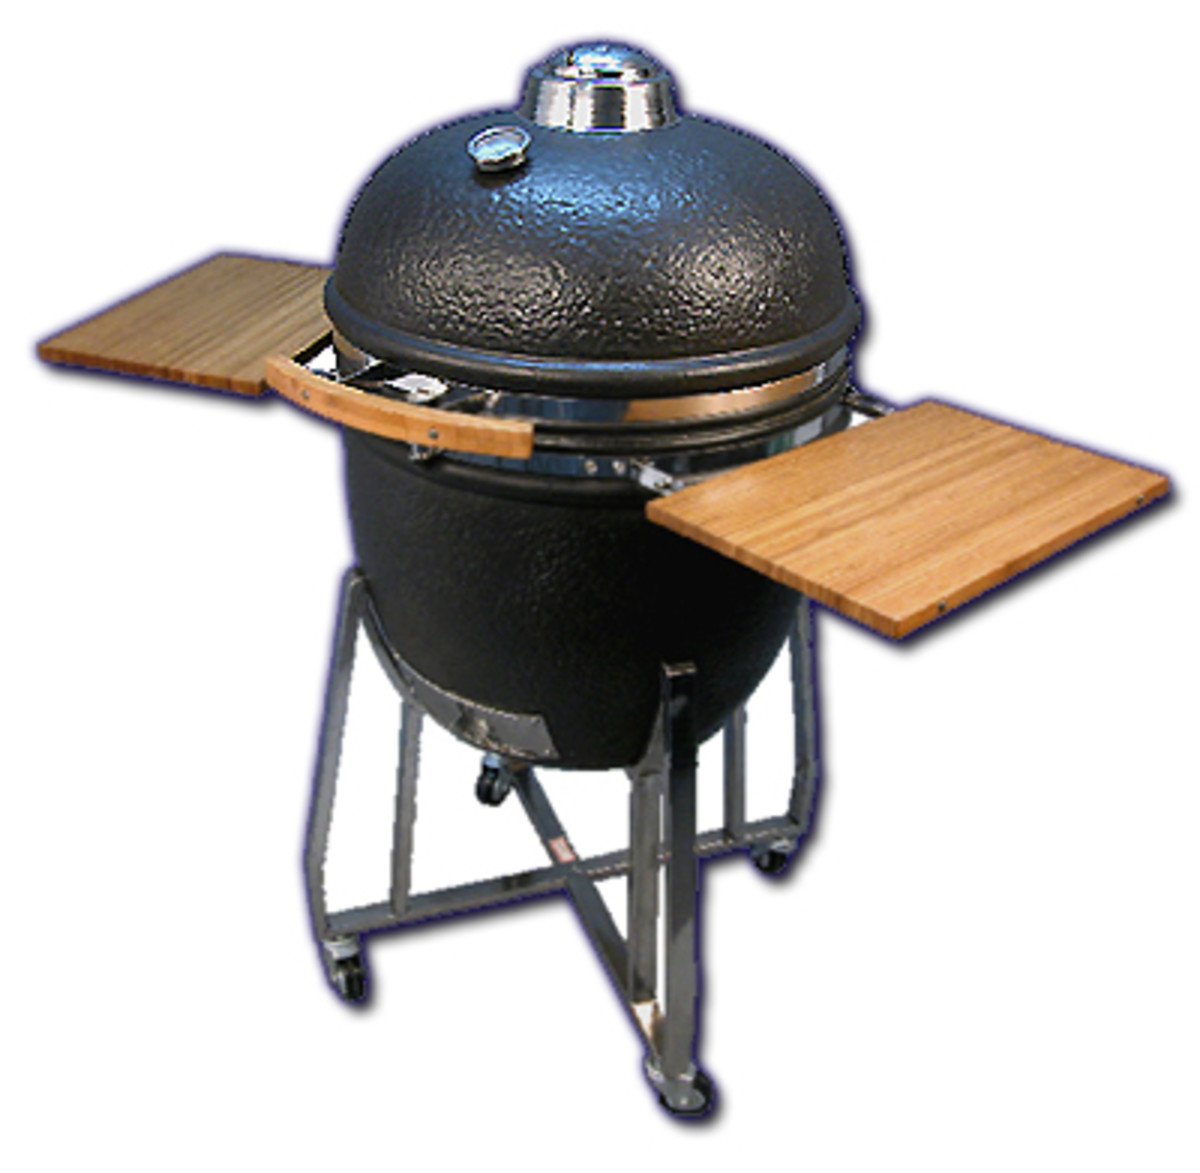 still cant figure it out?  get a ceramic kamado barbeque smoker instead